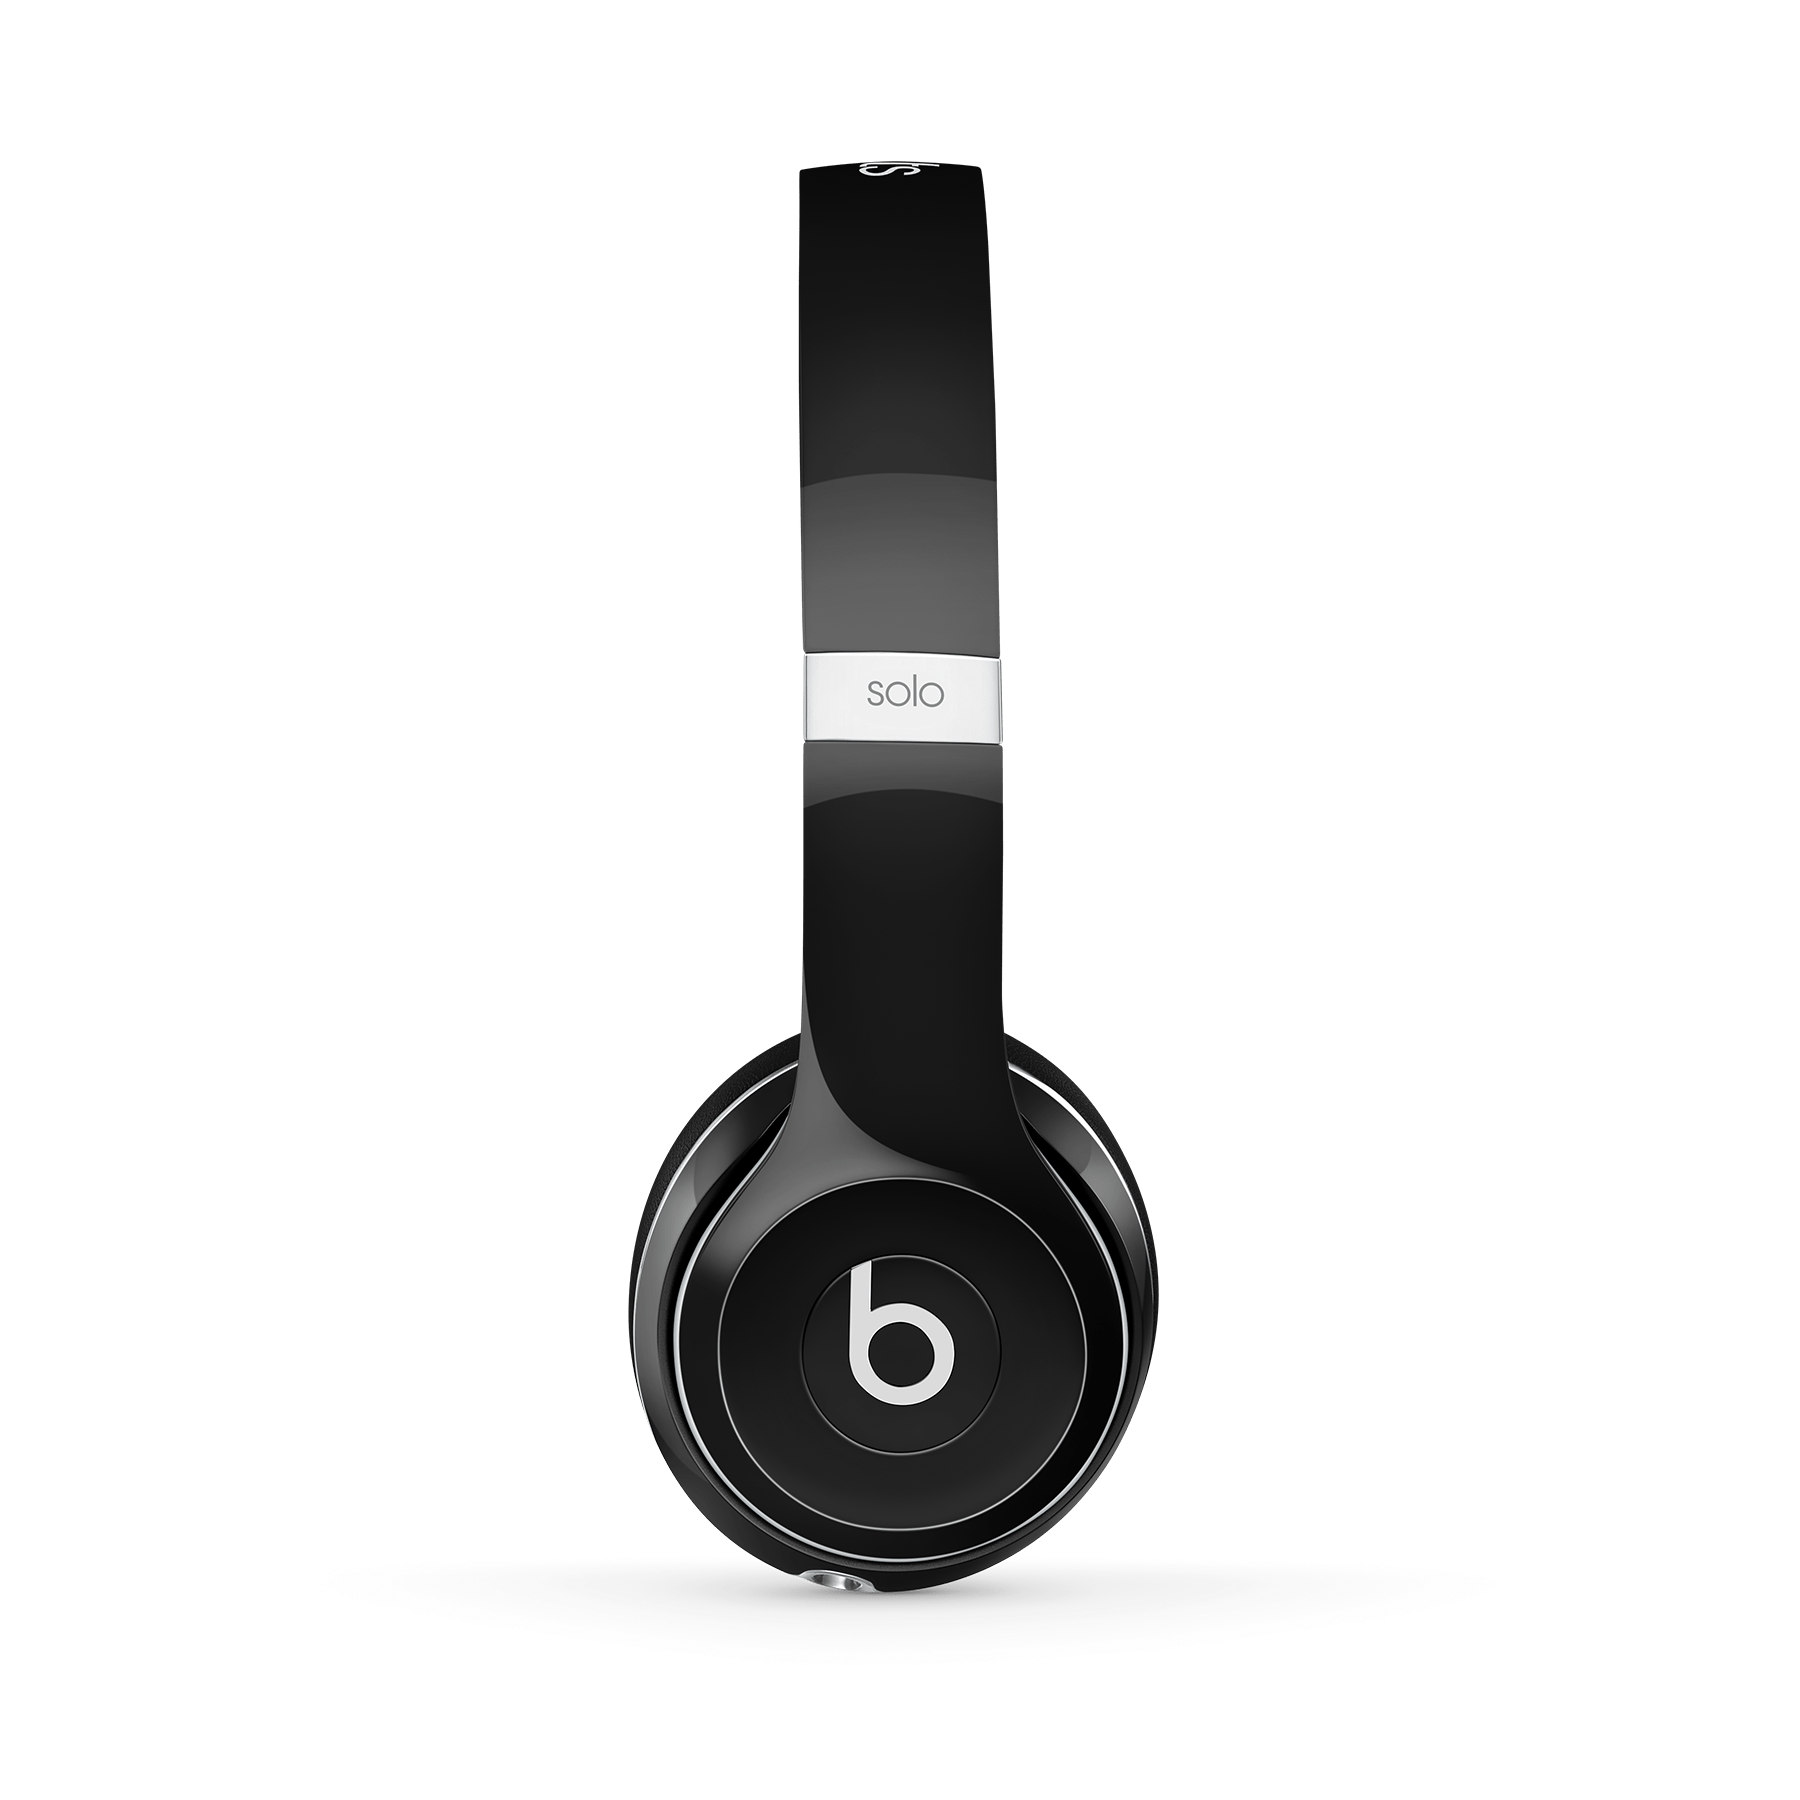 beats solo 2 deluxe edition